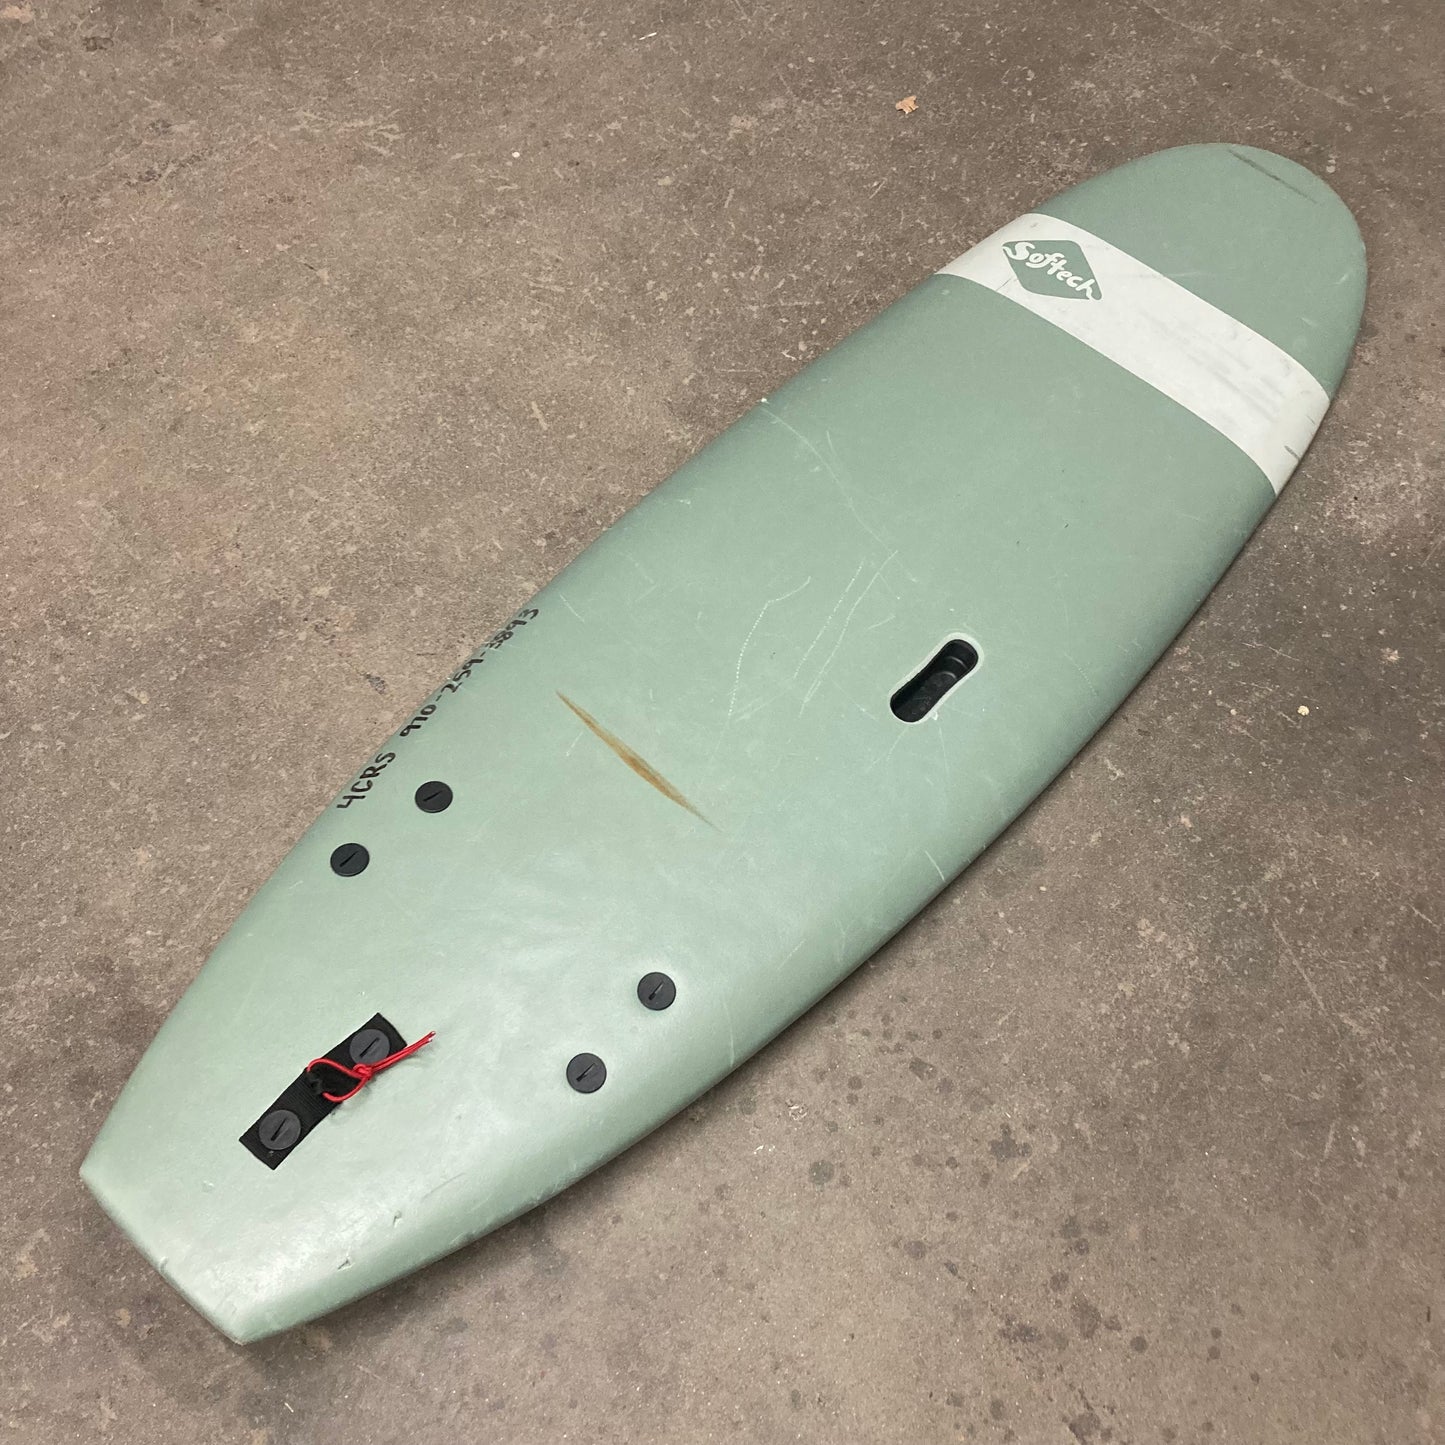 A green Demo Roller surfboard sitting on a concrete floor.